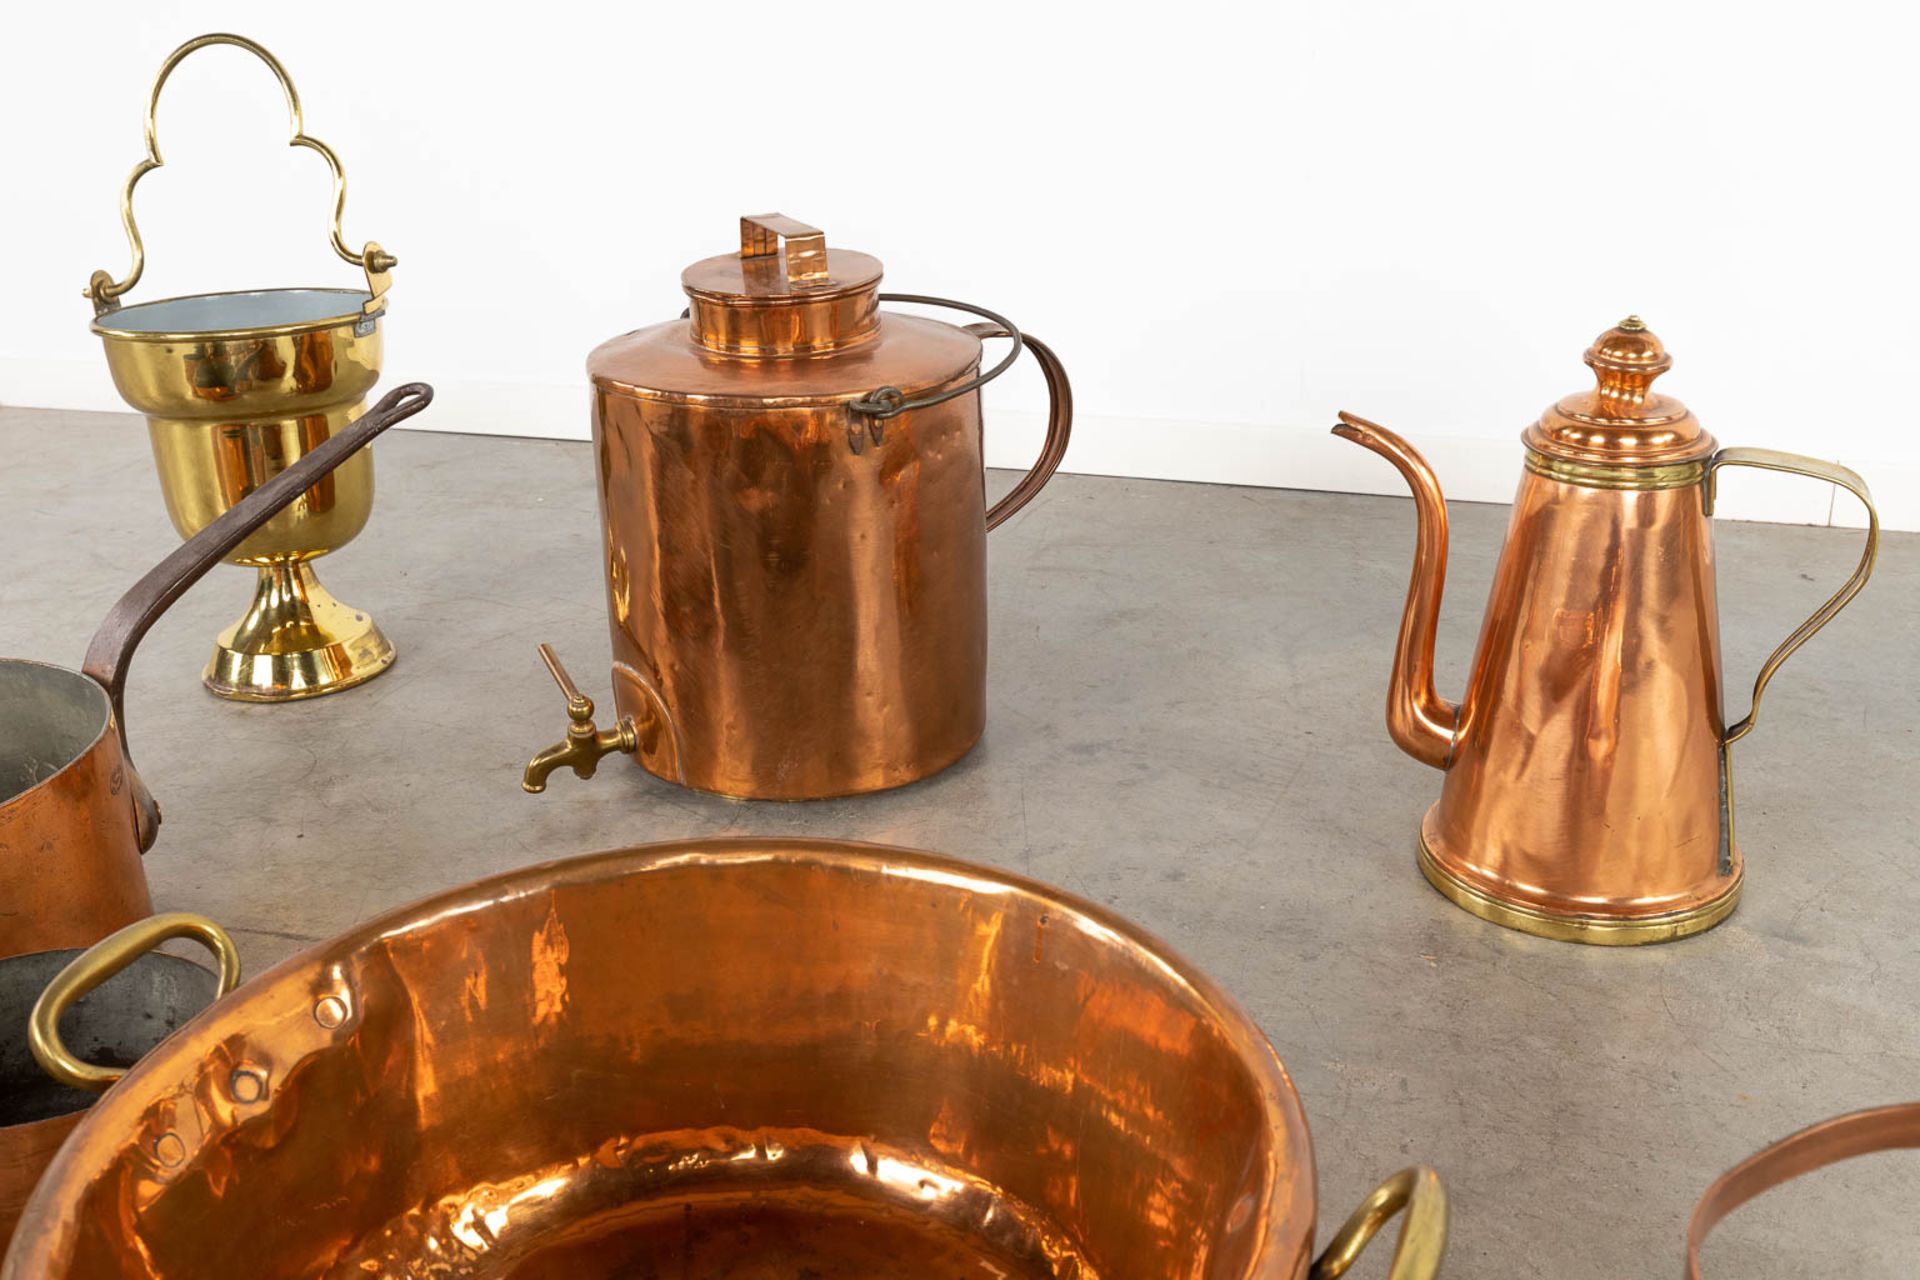 A collection of copper accessories and kitchen utensils. (W:47 x H:40 x D:35 cm) - Image 5 of 11